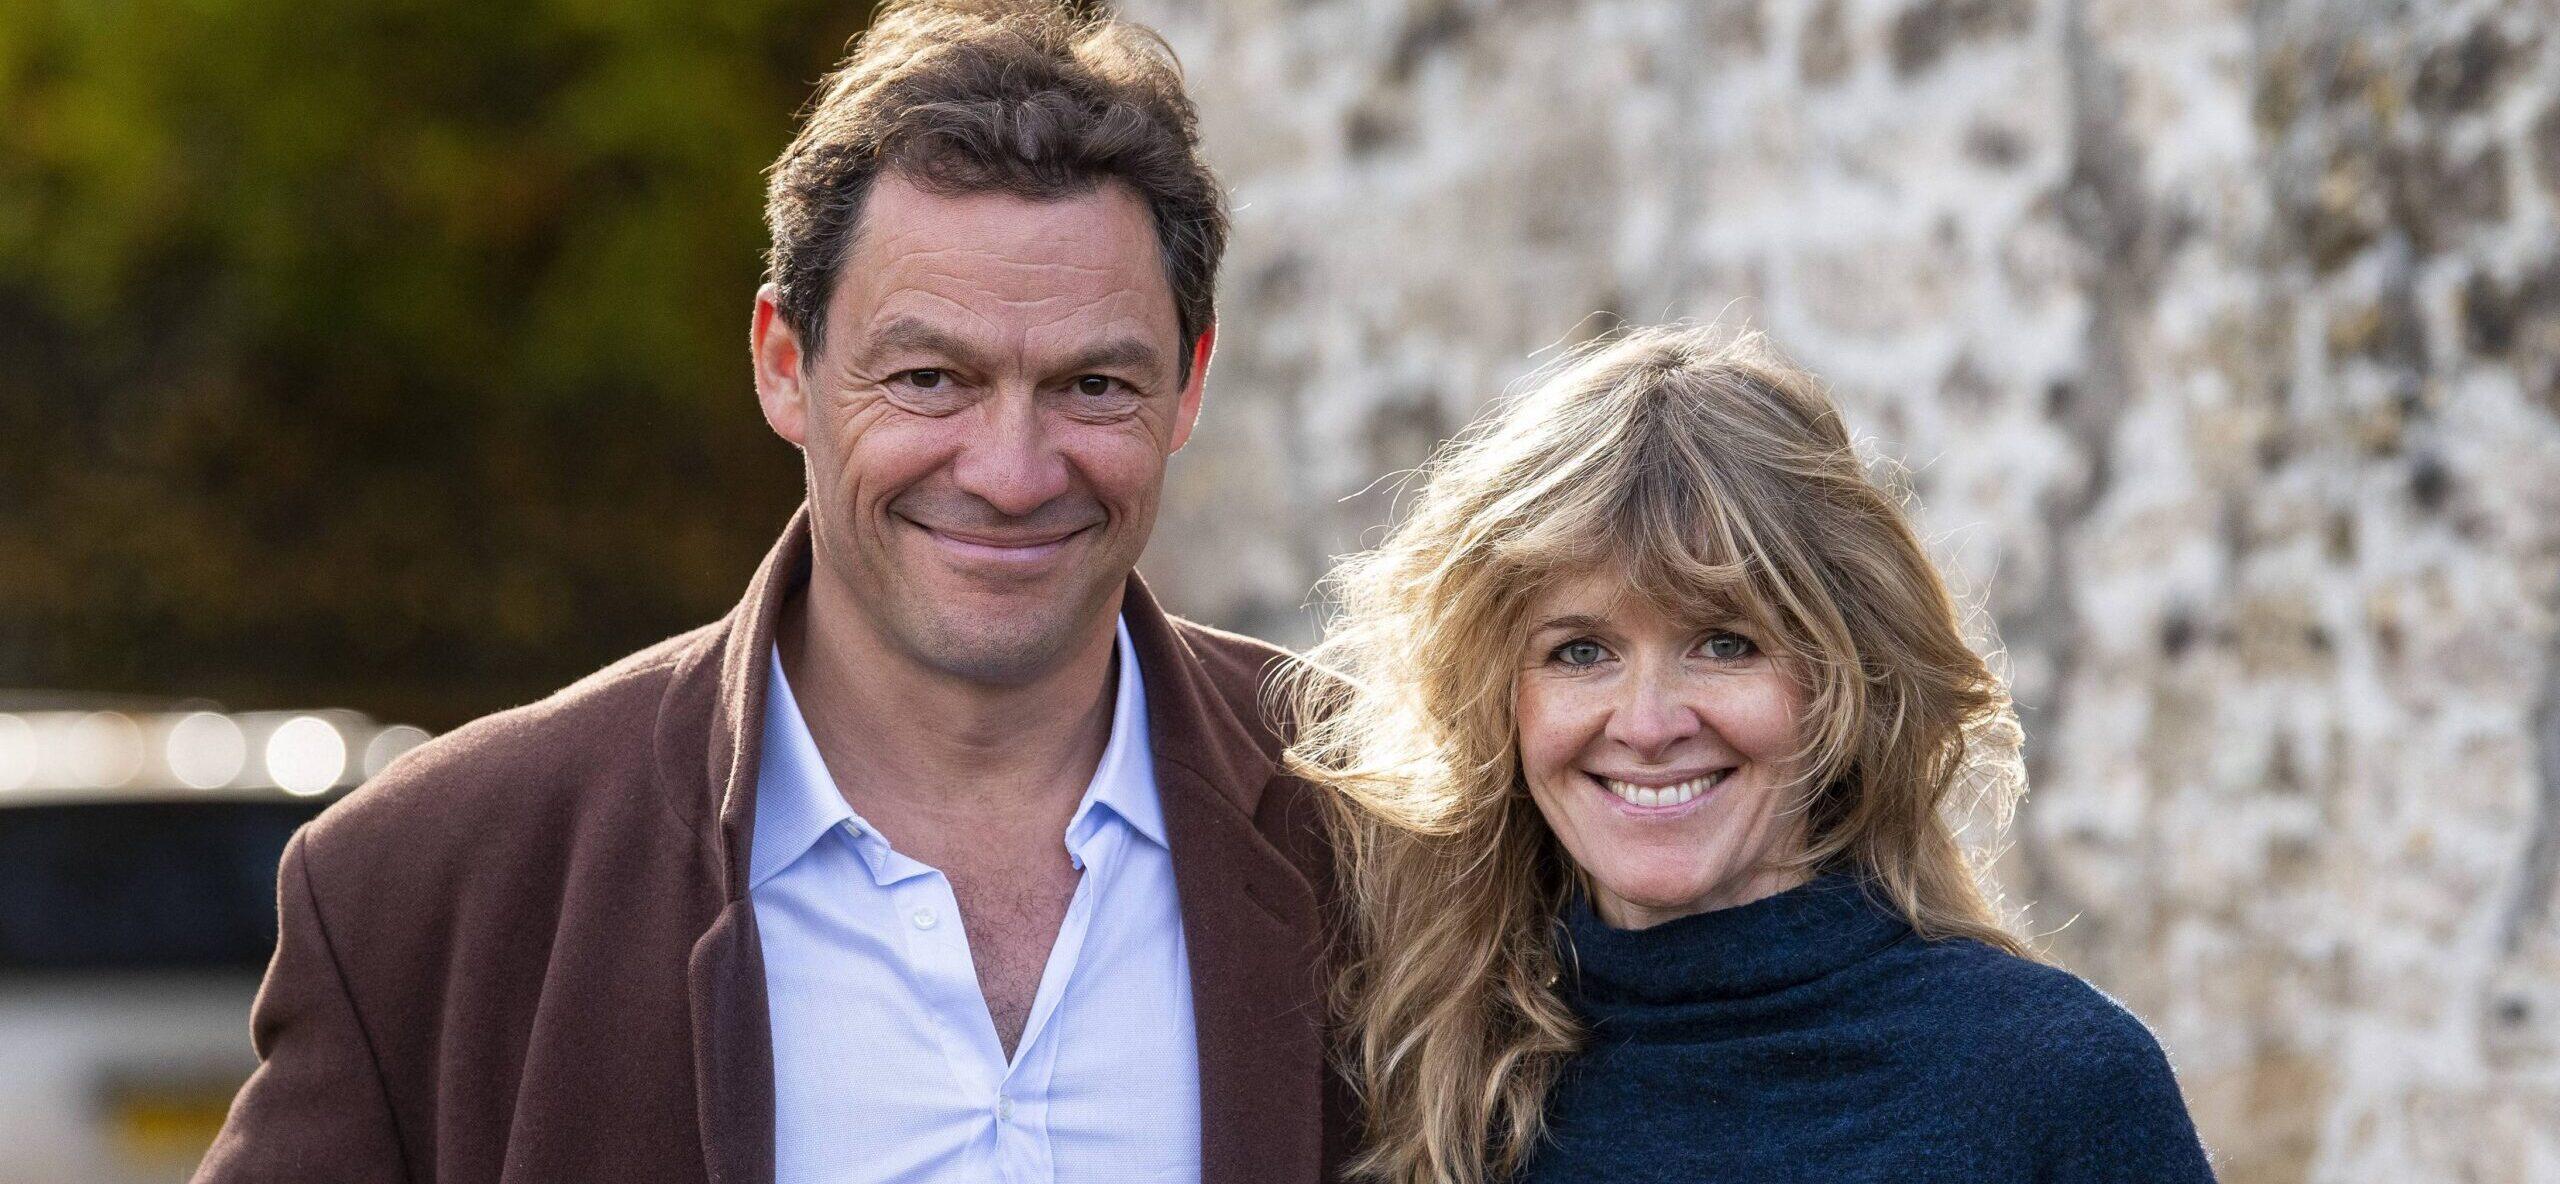 Dominic West Finally Comments On Those Compromising Lily James Photos